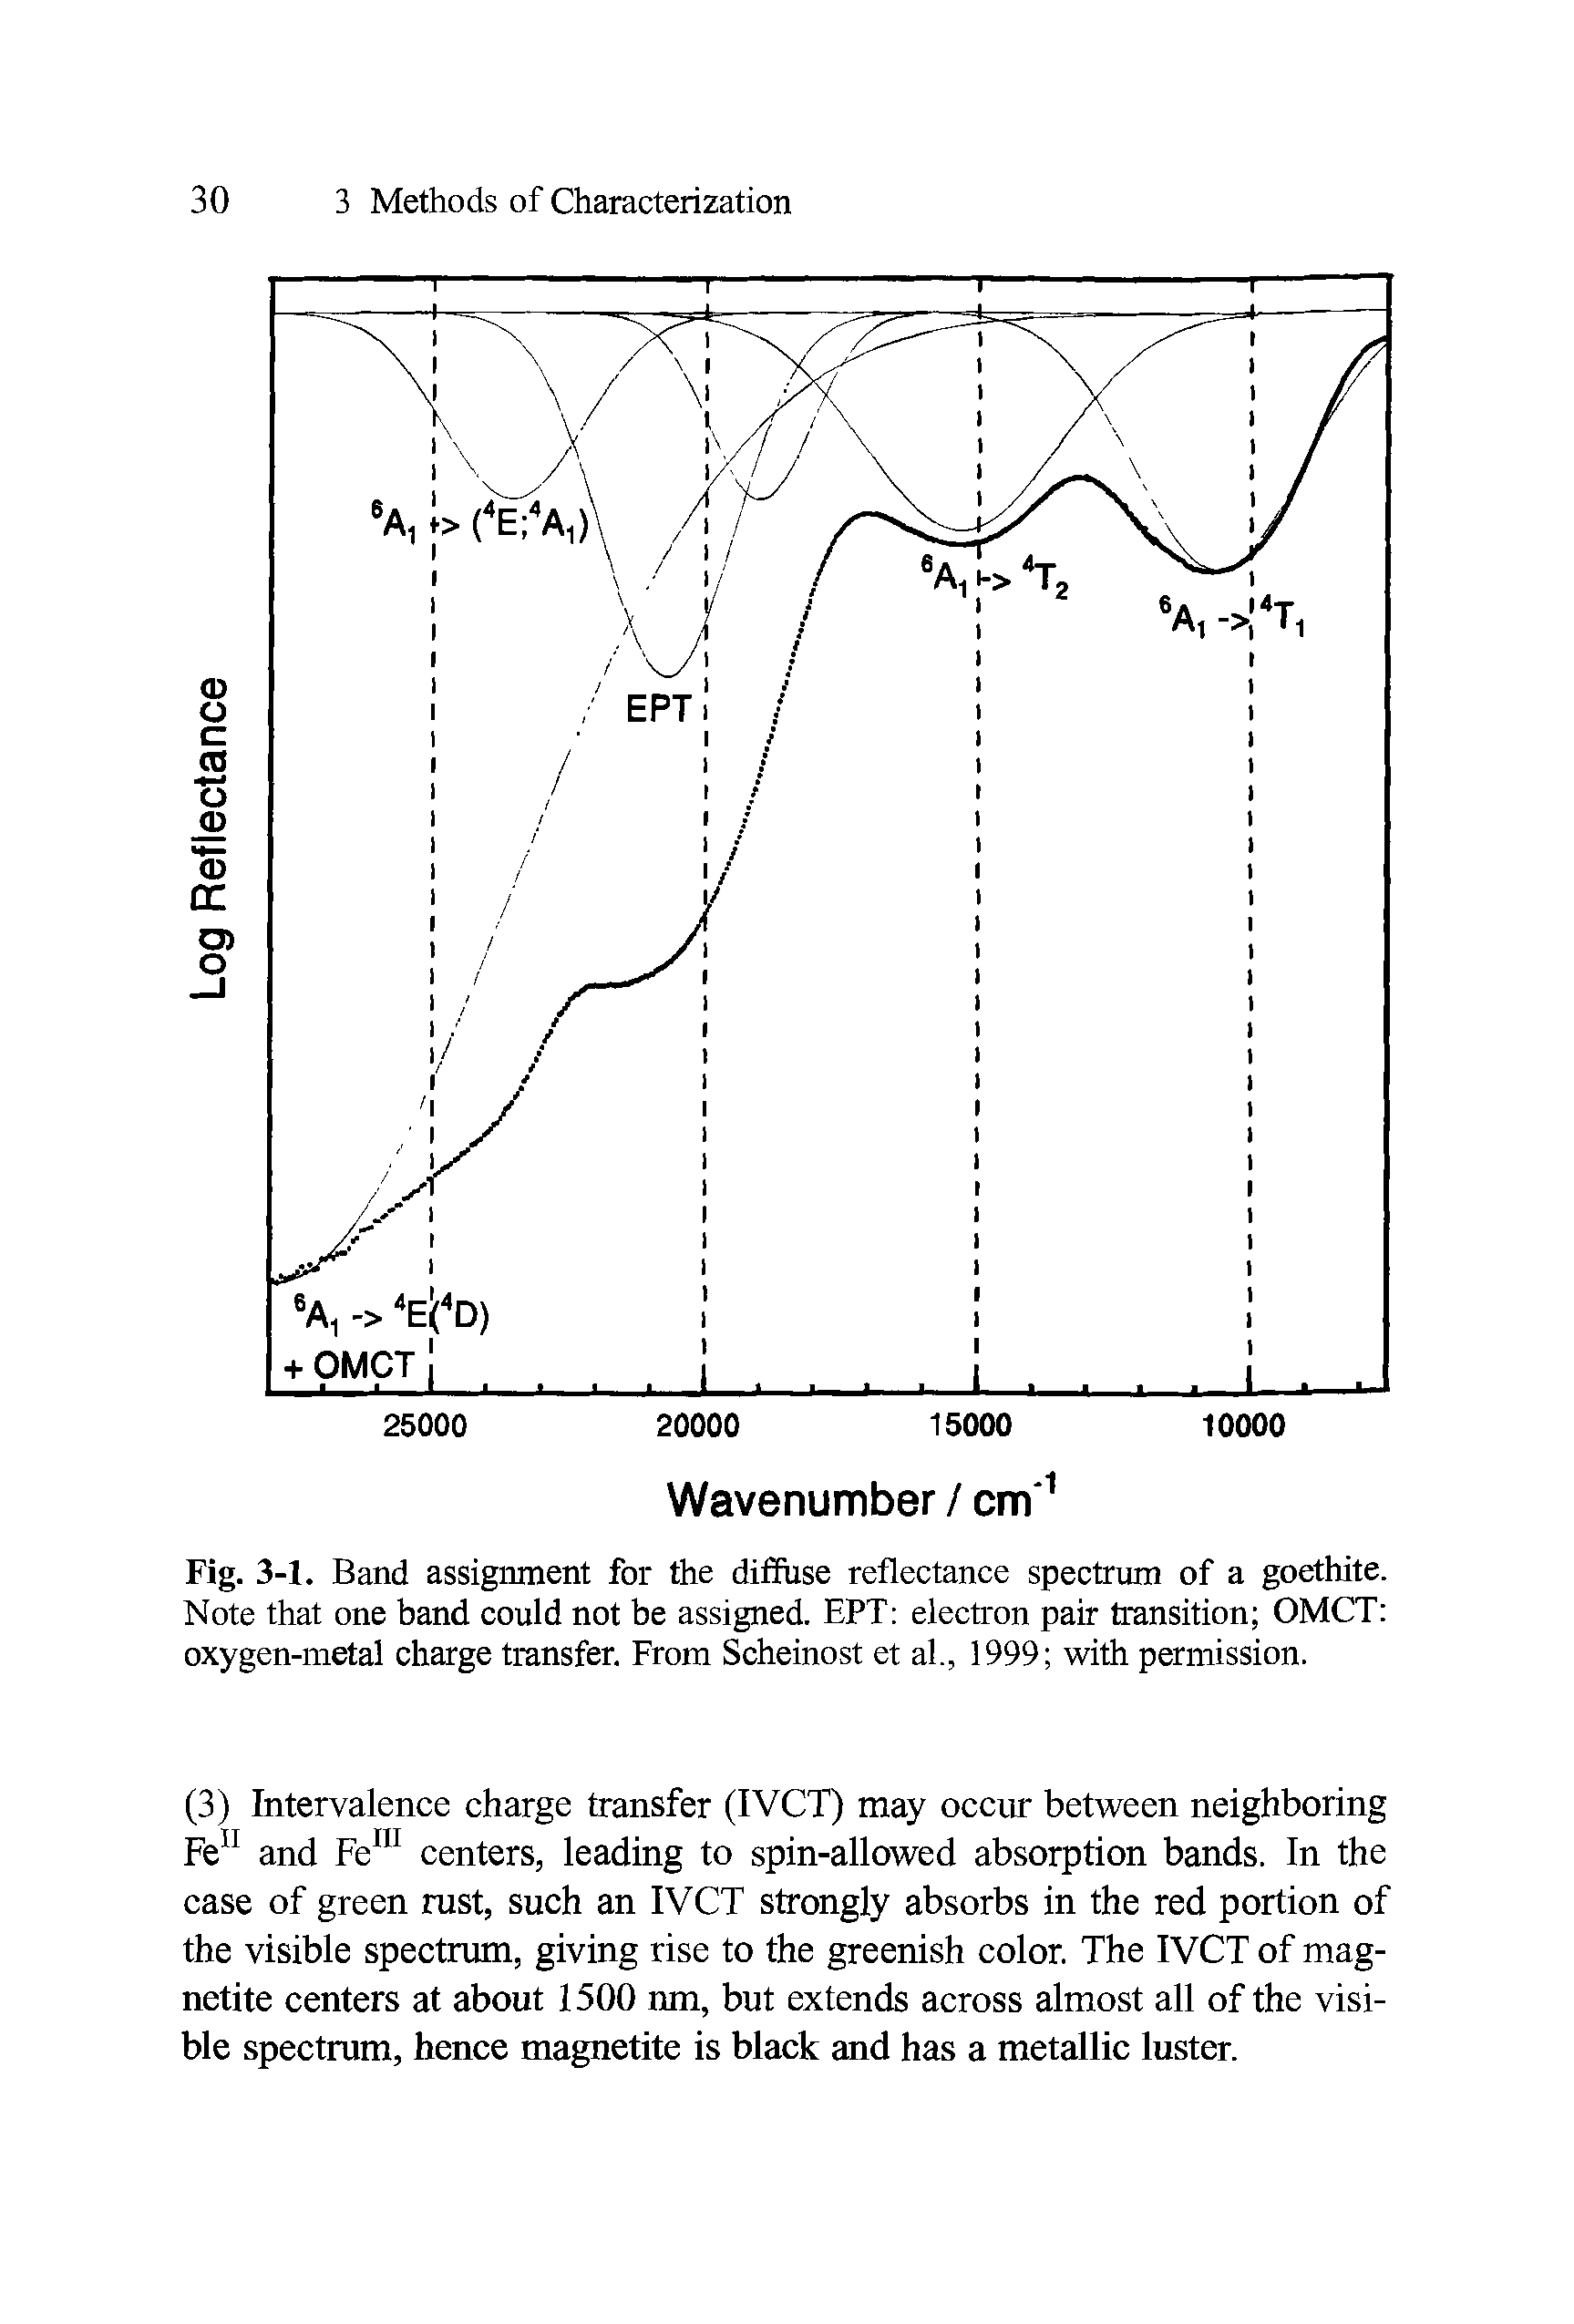 Fig. 3-1. Band assignment for the diffuse reflectance spectrum of a goethite. Note that one band eould not be assigned. EPT electron pair transition OMCT oxygen-metal charge transfer. From Seheinost et al., 1999 with permission.